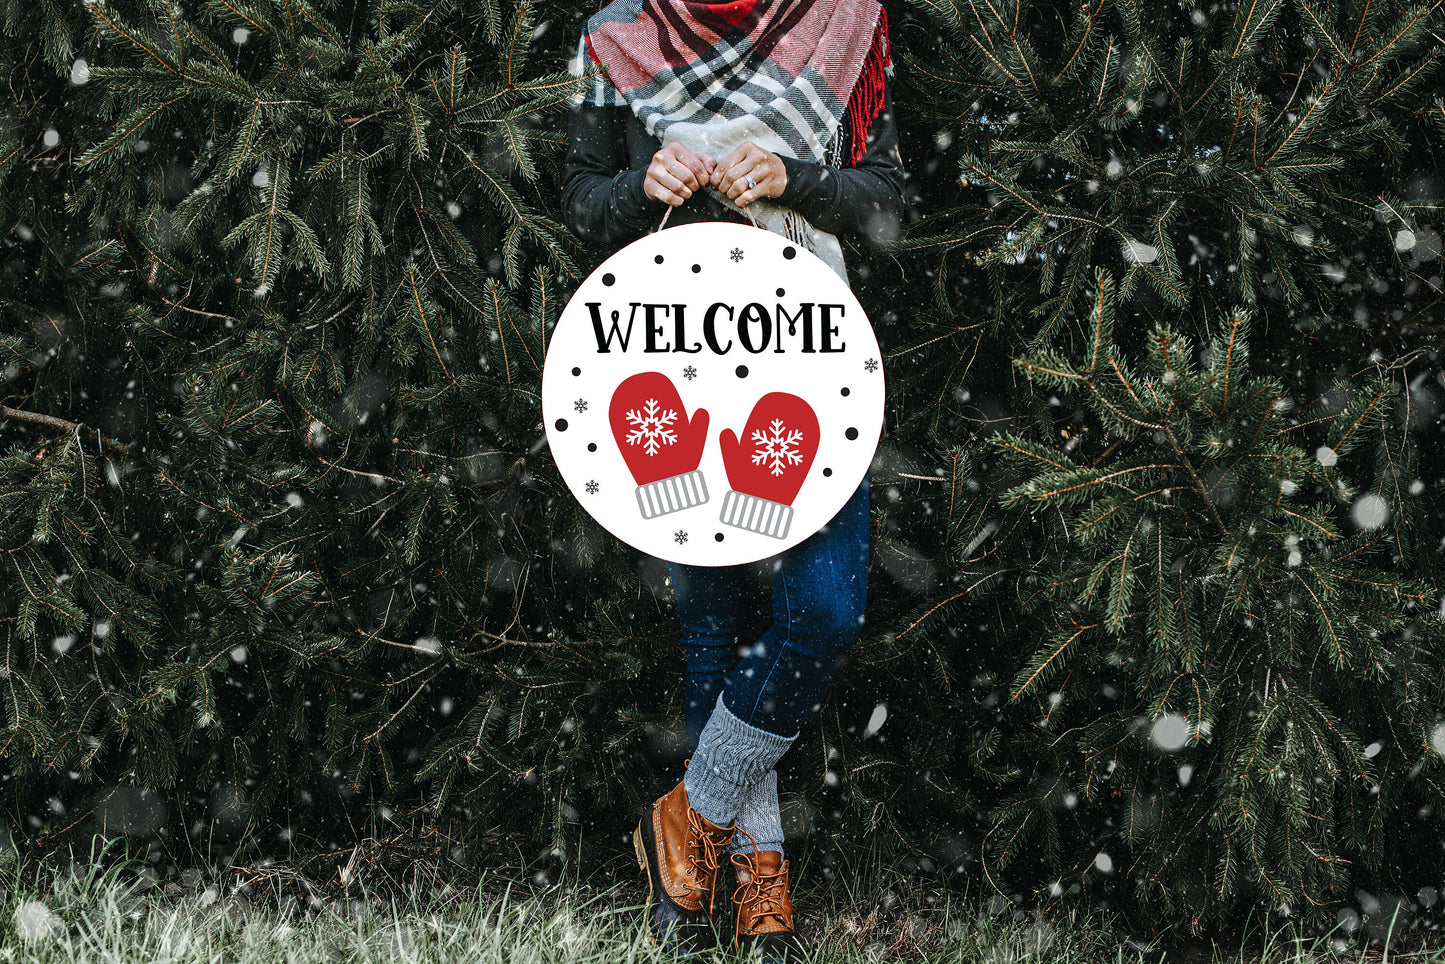 Mittens Welcome Christmas Round Printed Handmade Wood Sign